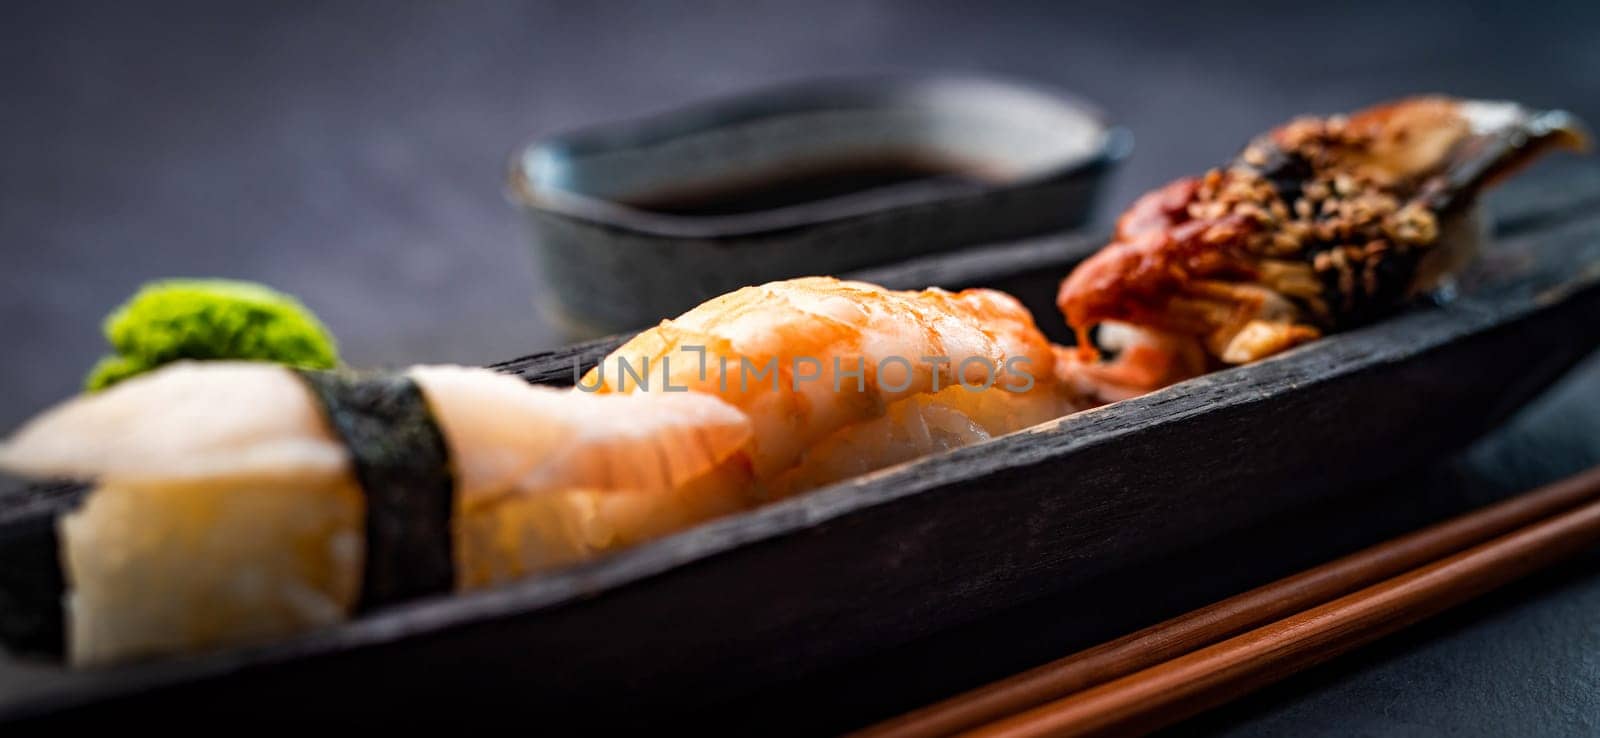 Sushi sashimi set with shrimps and soy sauce served with wooden chopsticks and wasabi on black table. Traditional japanese meal with rice and seafood closeup